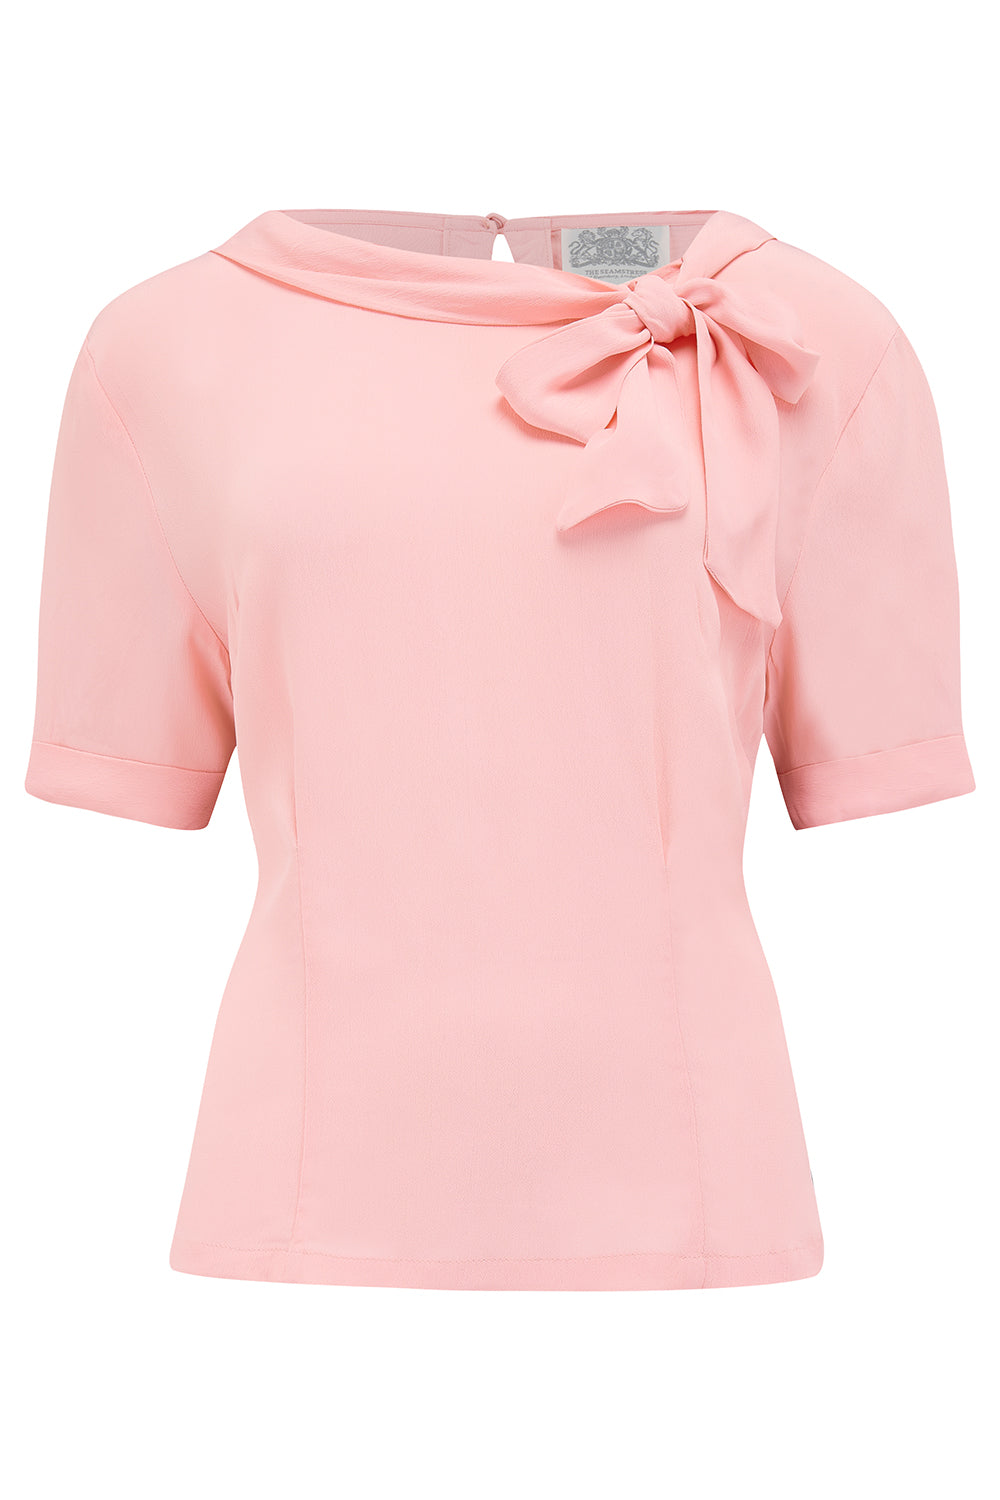 Cindy Blouse In Blossom Pink , Classic 1940s Vintage Inspired Style